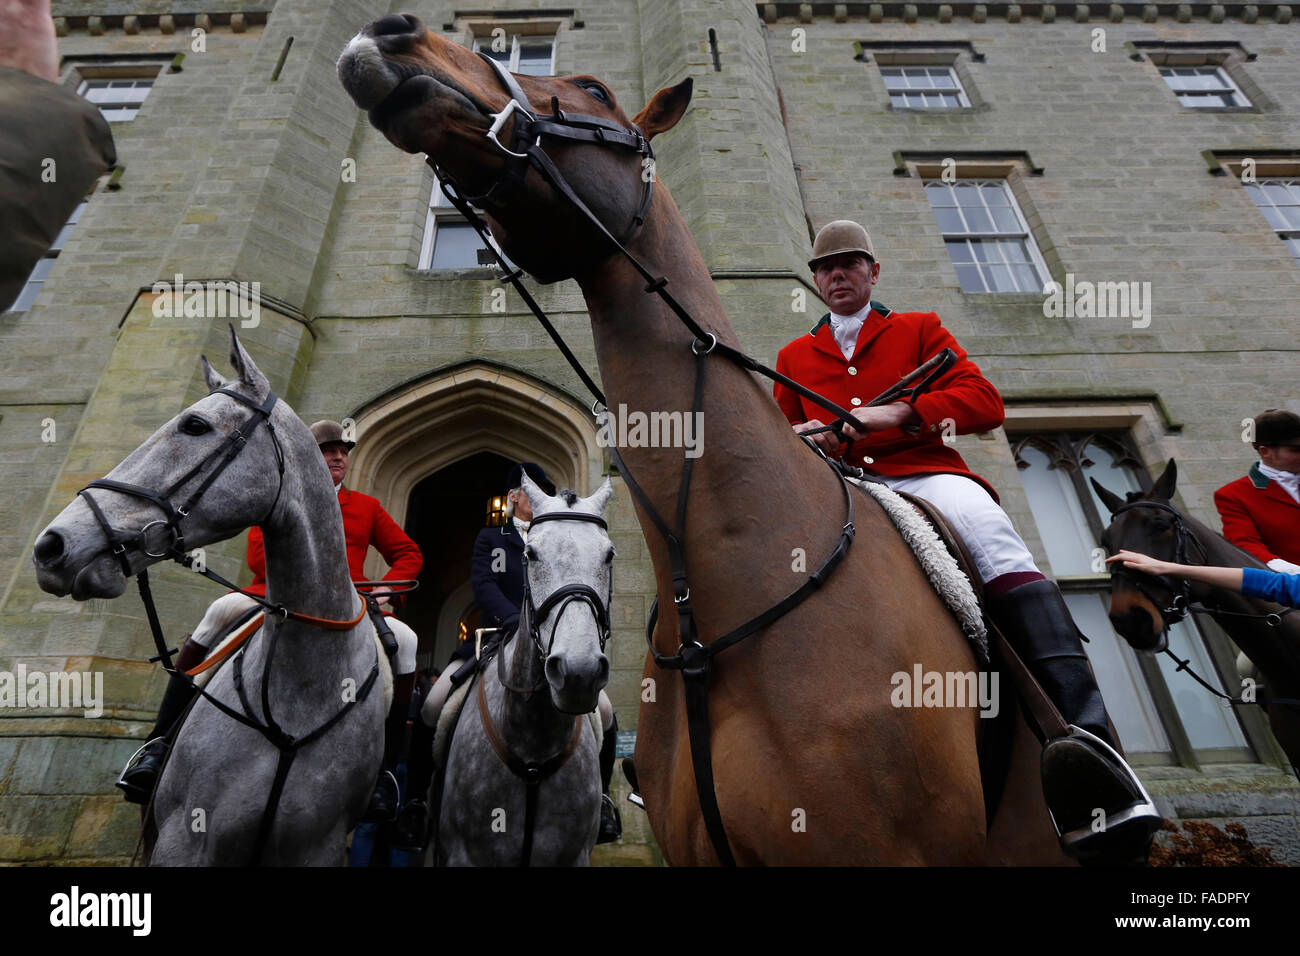 Members of the Old Surrey Burstow and West Kent Hunt gather at Chiddingstone Castle for the annual Boxing Day hunt in Chiddingst Stock Photo